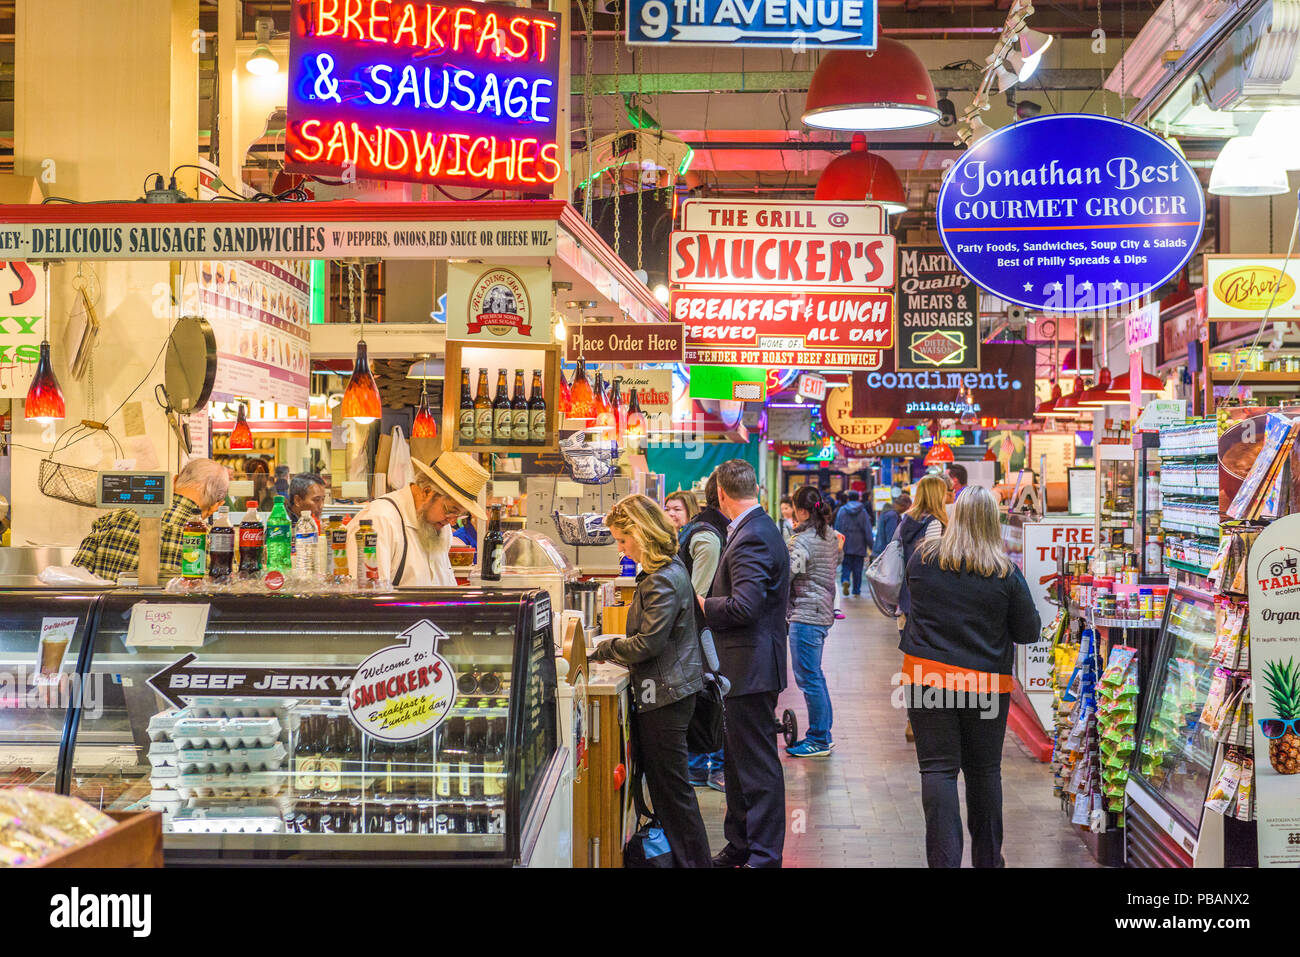 PHILADELPHIA, PENNSYLVANIA - NOVEMBER 18, 2016: Vendors and customers in Reading Terminal Market. The historic market is a popular attraction for culi Stock Photo